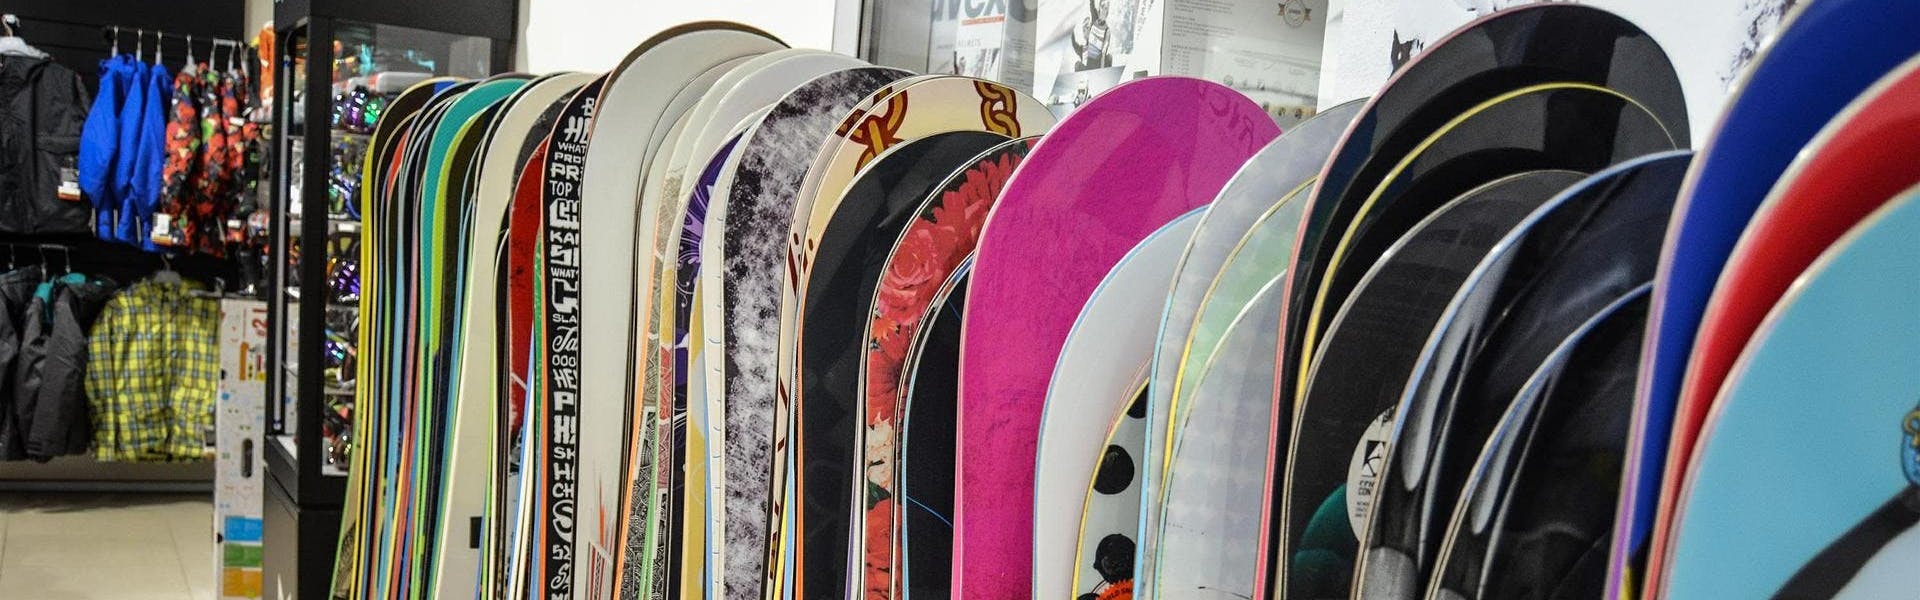 Several snowboards in a row at a store.